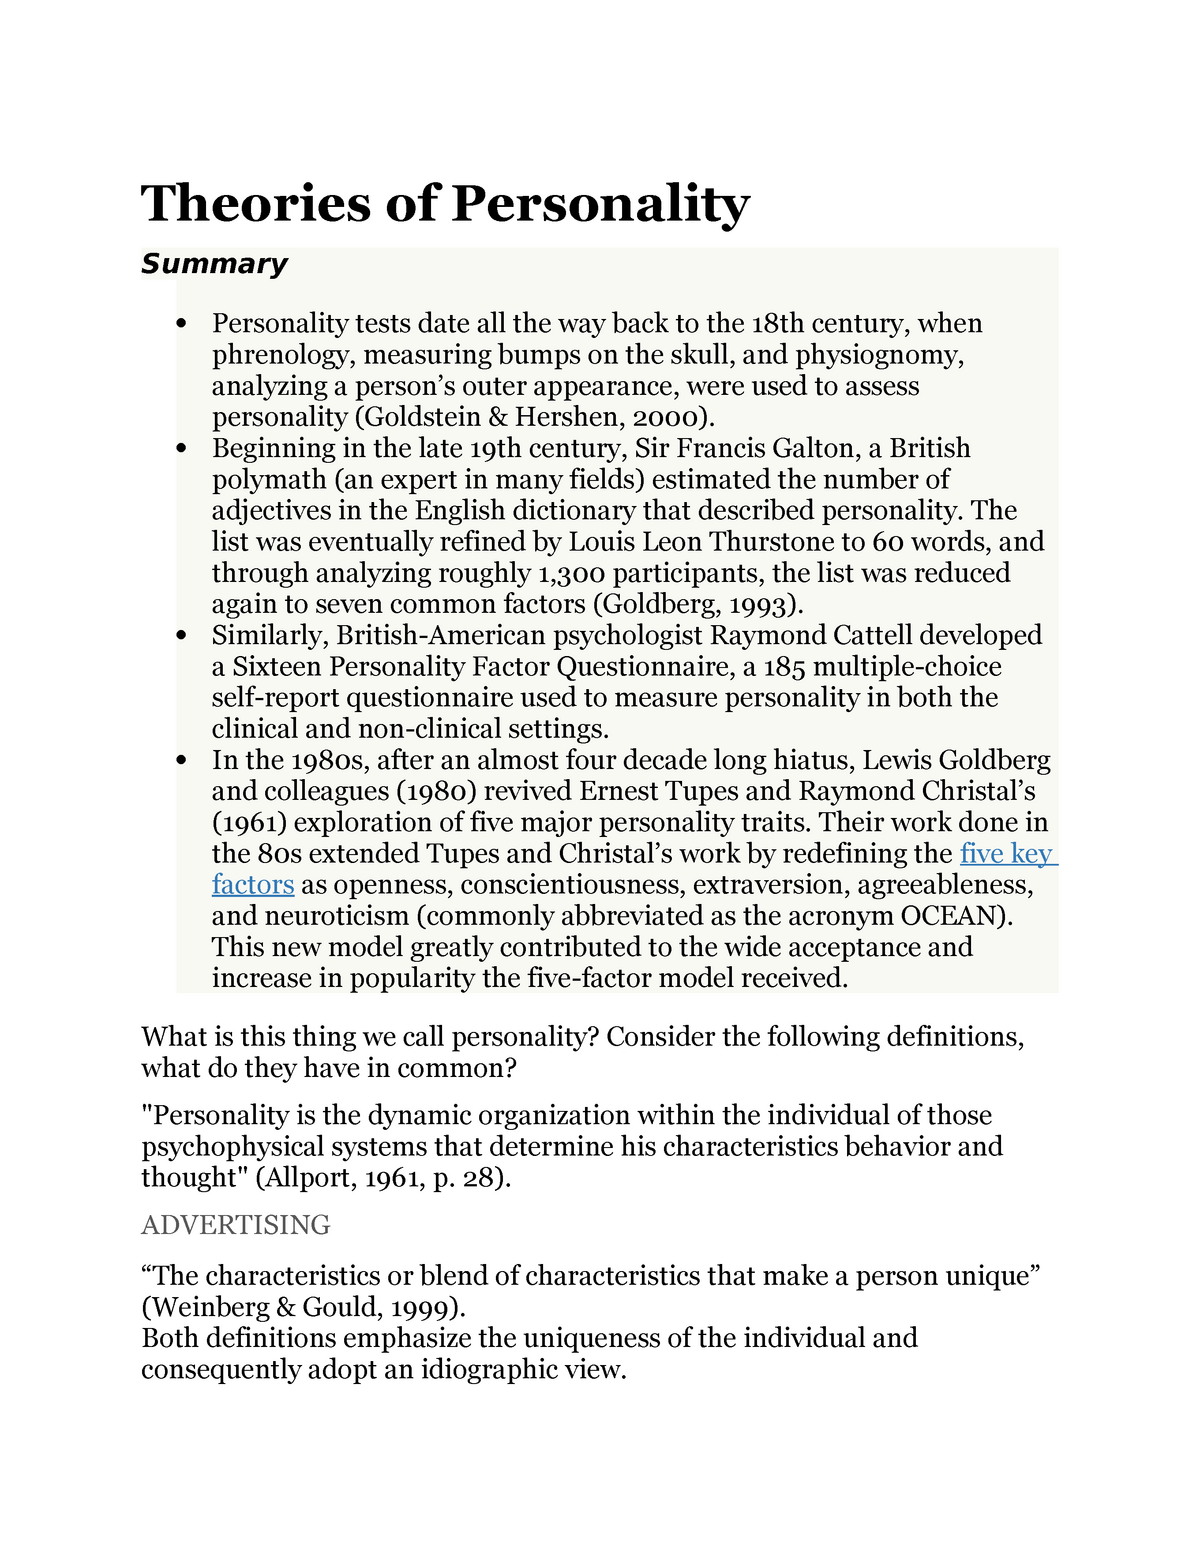 theories of personality essay questions